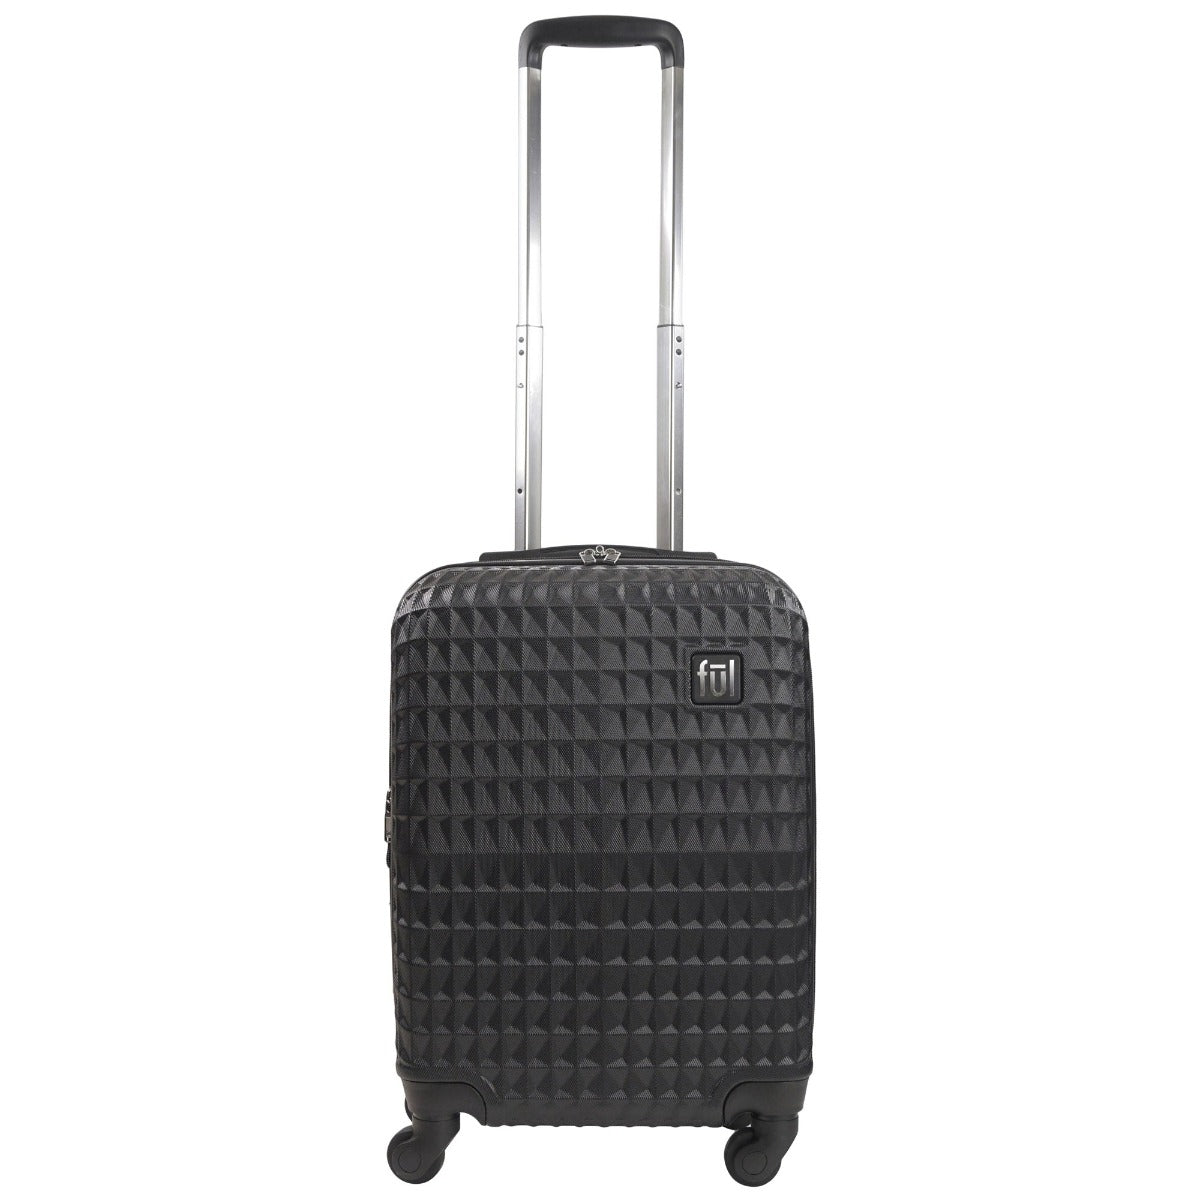 Ful Geo 22" carry on expandable hard sided spinner suitcase luggage black